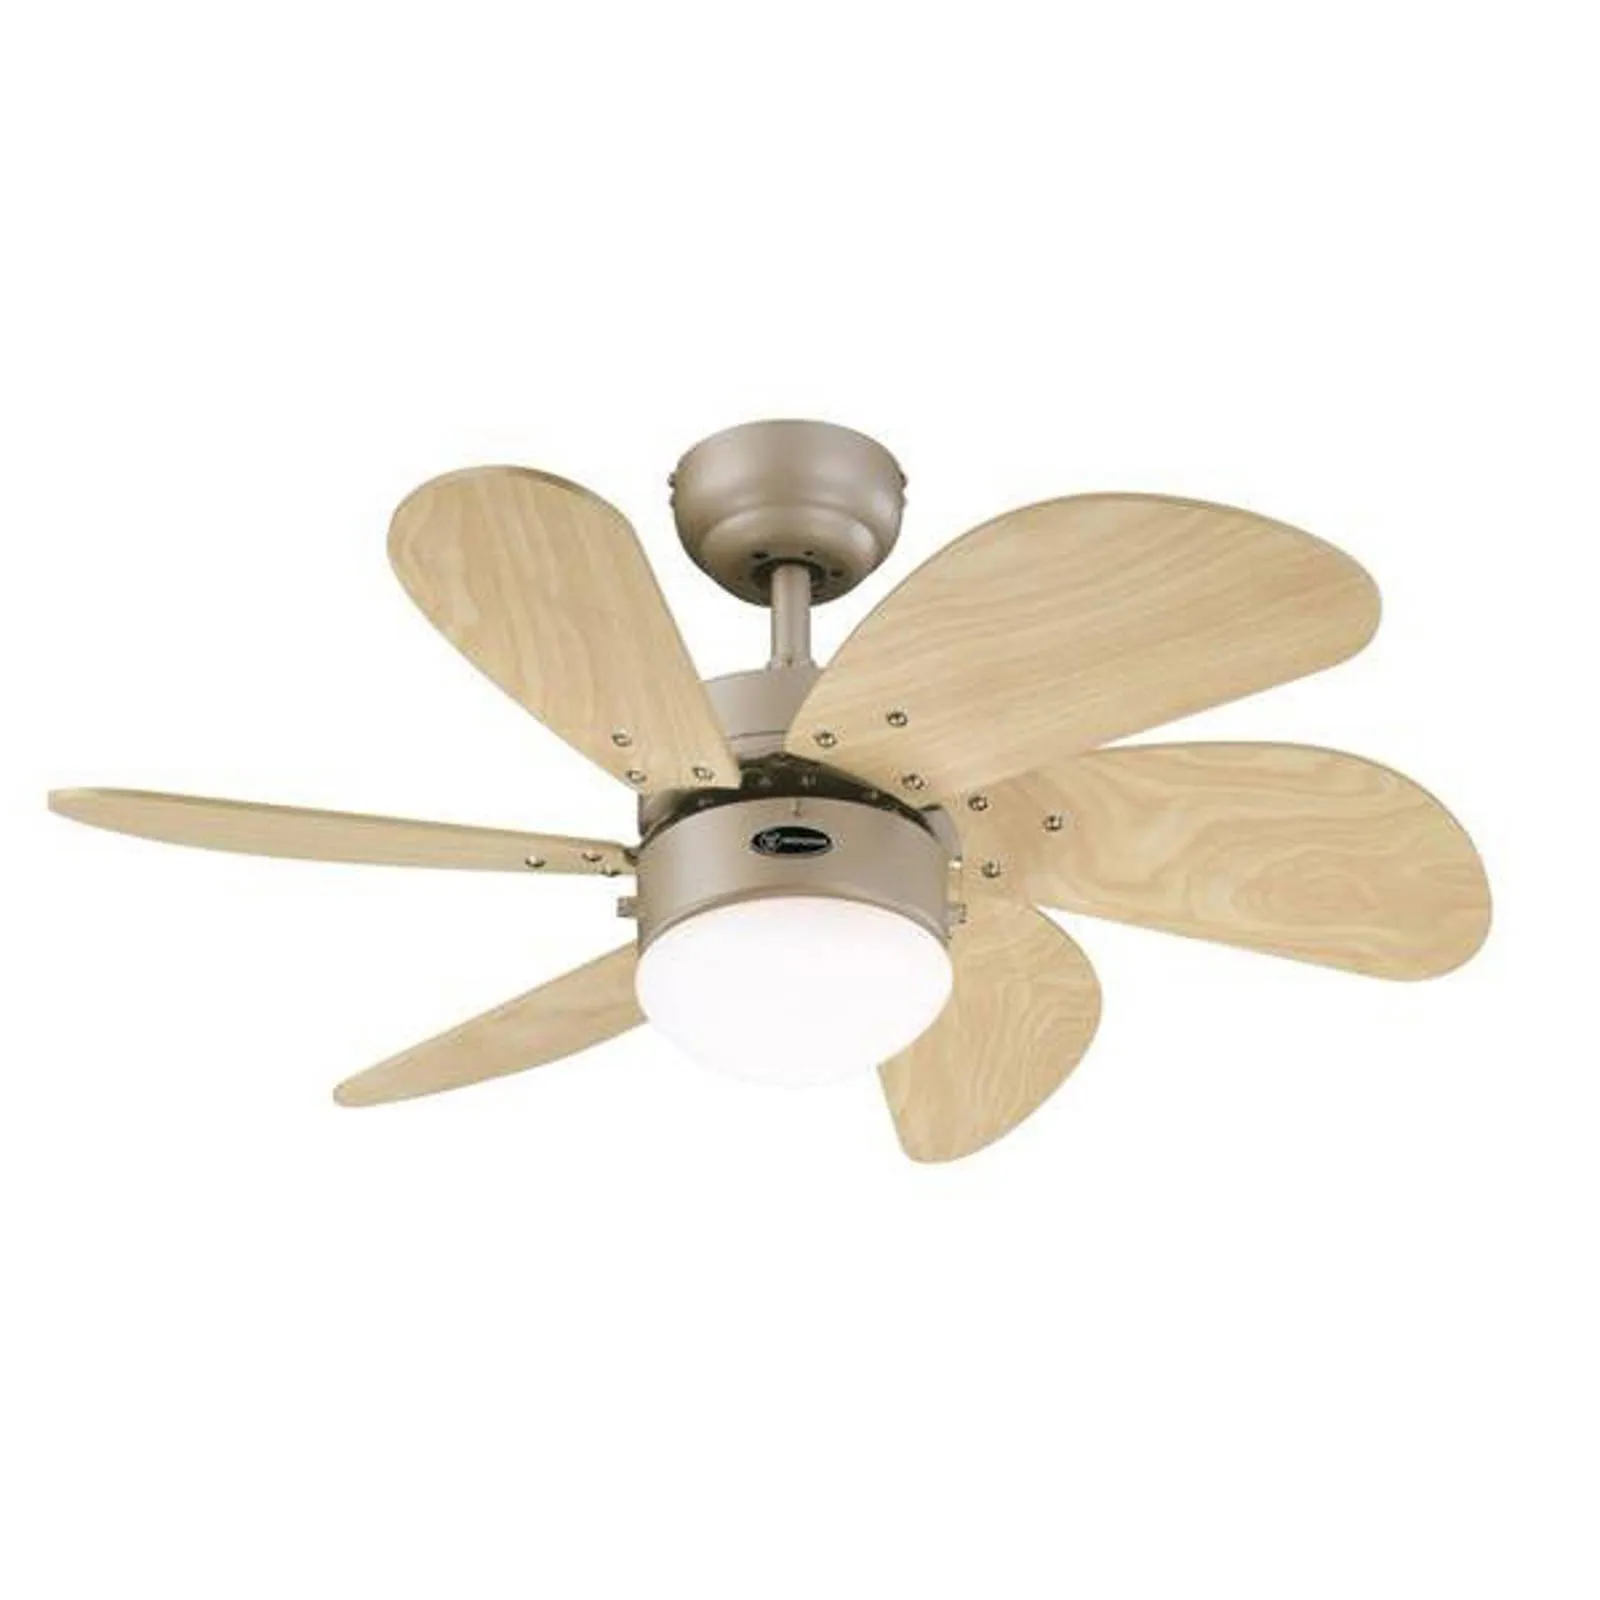 Turbo Swirl ceiling fan with two pull cords